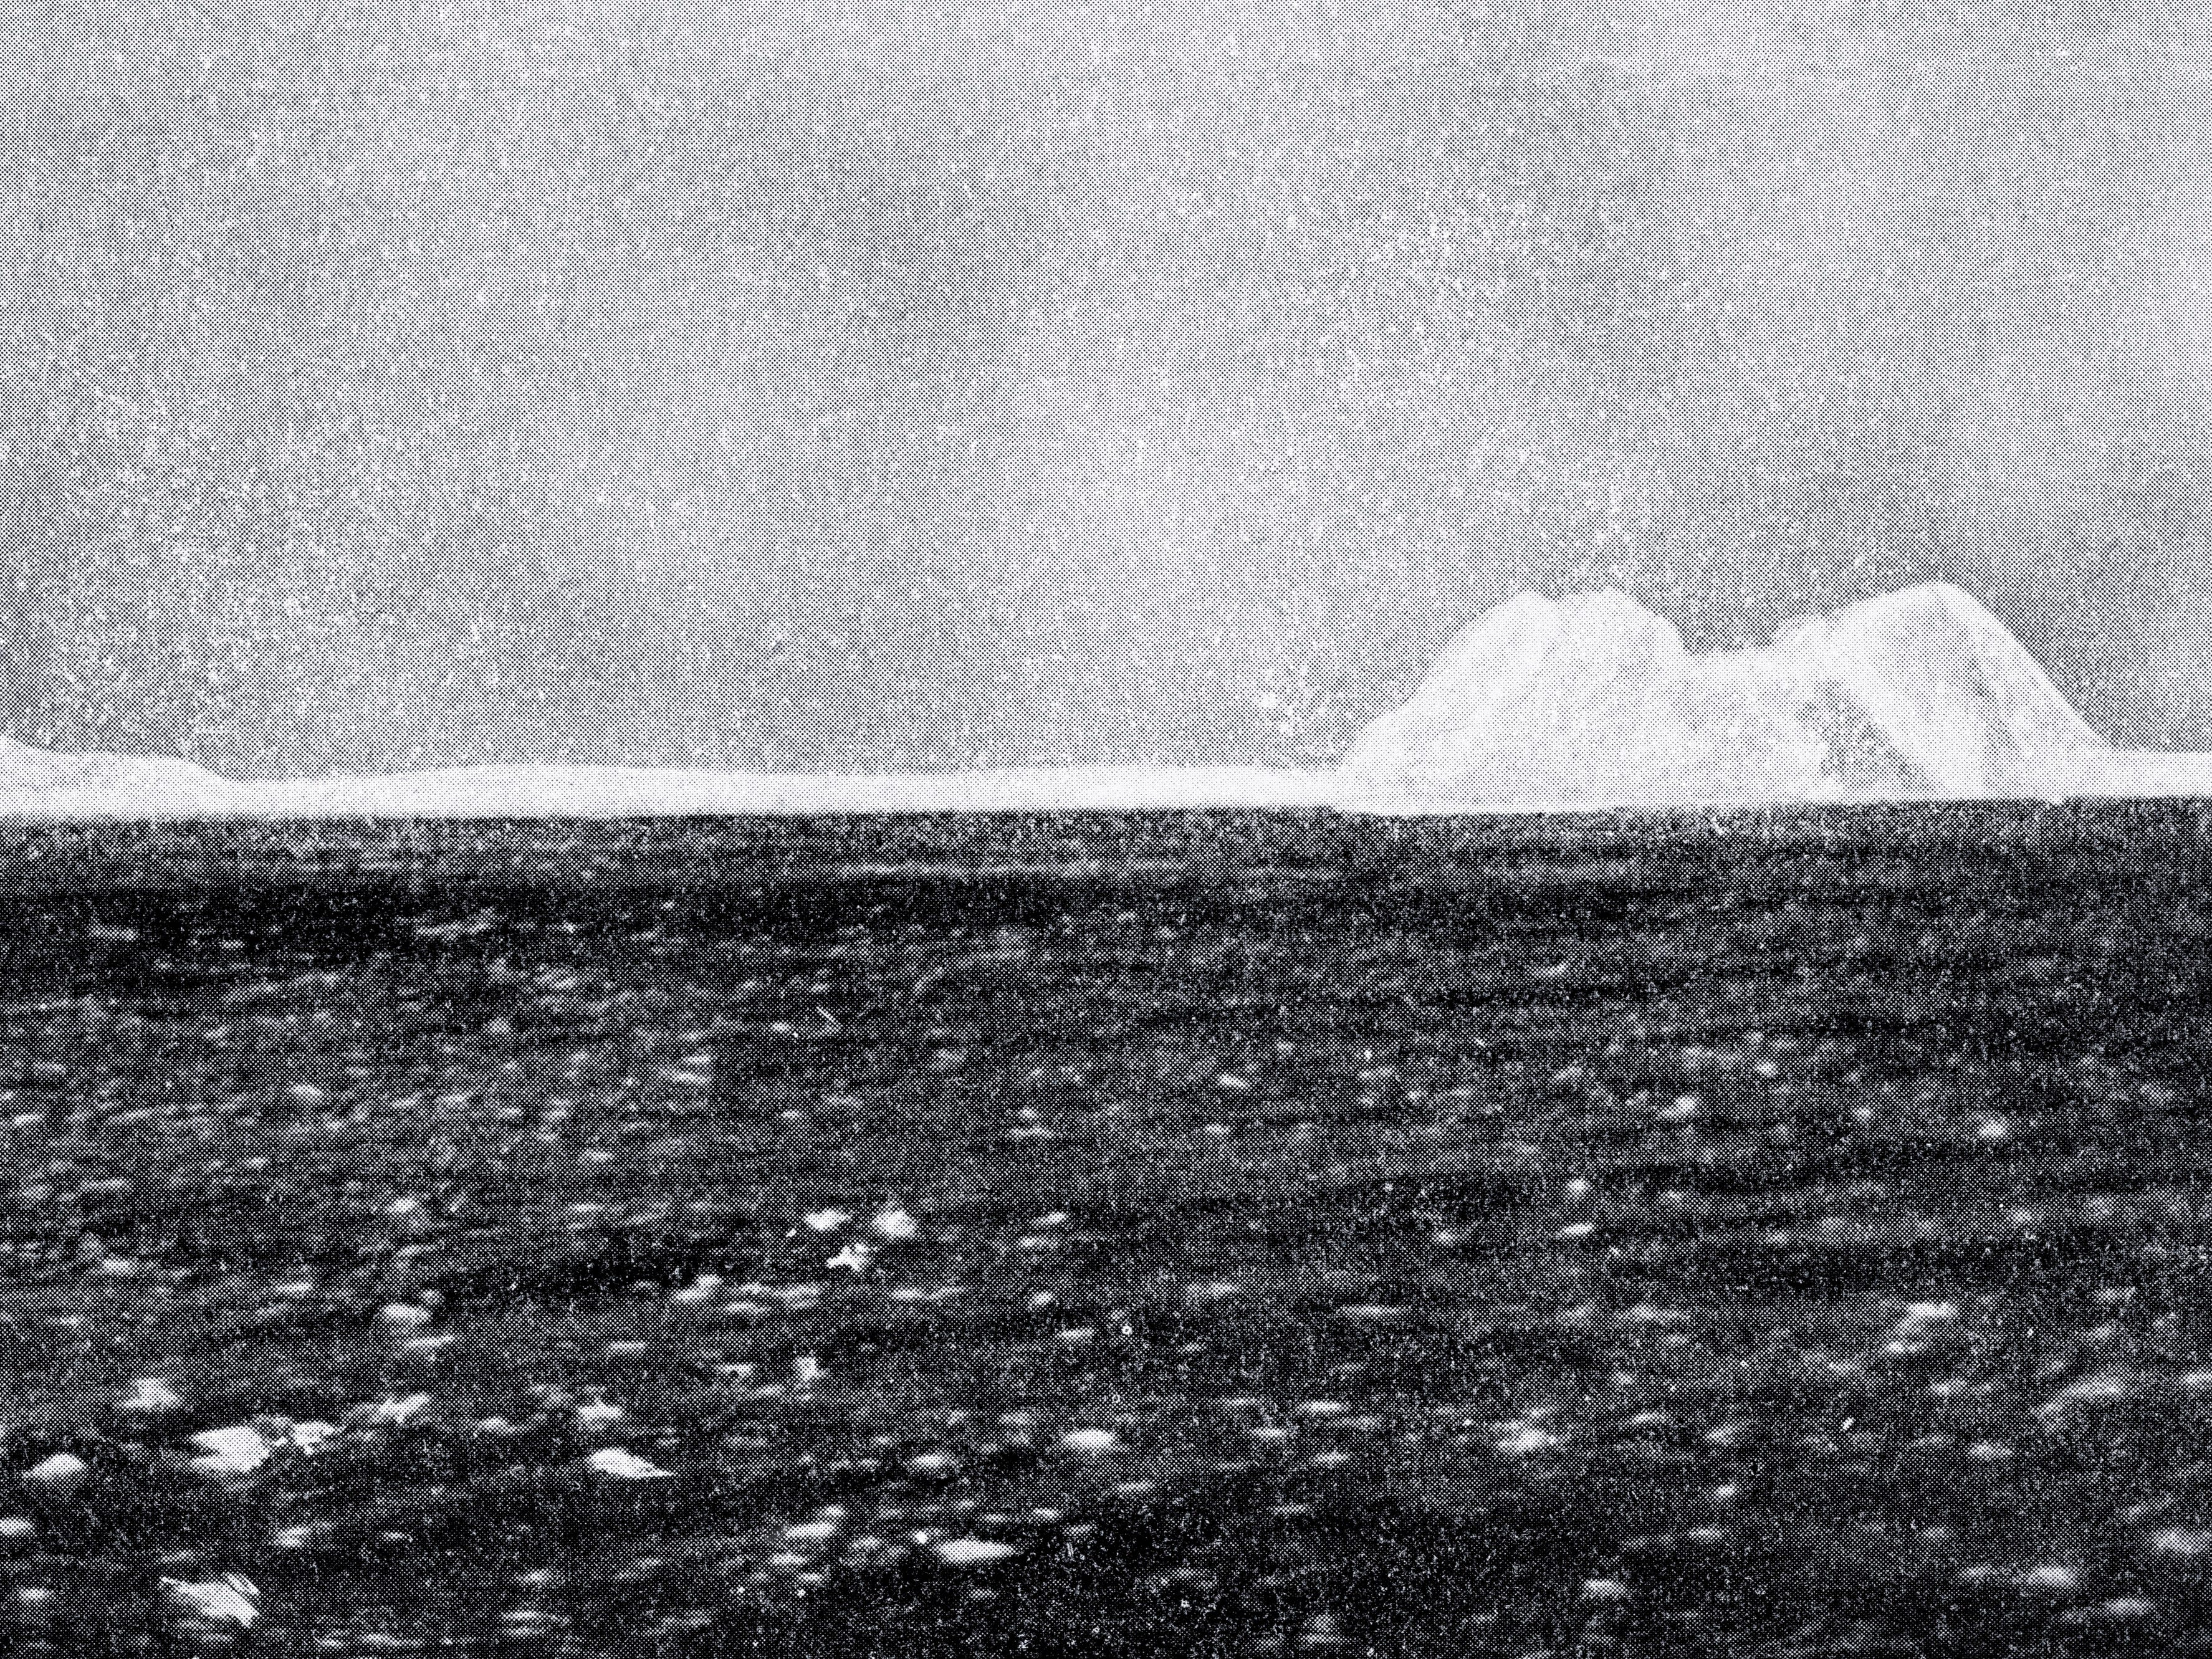 <p>The two lookouts, Fredrick Fleet and Reginald Lee, <a href="https://www.britannica.com/topic/Titanic">failed to spot the iceberg</a> in time. Their job had been difficult due to an unusually calm ocean, which made the icebergs less visible, and because <a href="https://www.insider.com/titanic-secrets-facts-2018-4#it-is-likely-that-the-crew-didnt-spot-the-iceberg-in-time-because-they-didnt-have-binoculars-7">their binoculars were missing</a>. </p><p>The Titanic attempted to avoid the iceberg, but failed to turn in time. As the ship scraped the iceberg, it tore a hole in the side of the ship, rupturing at least five of the watertight compartments.</p>